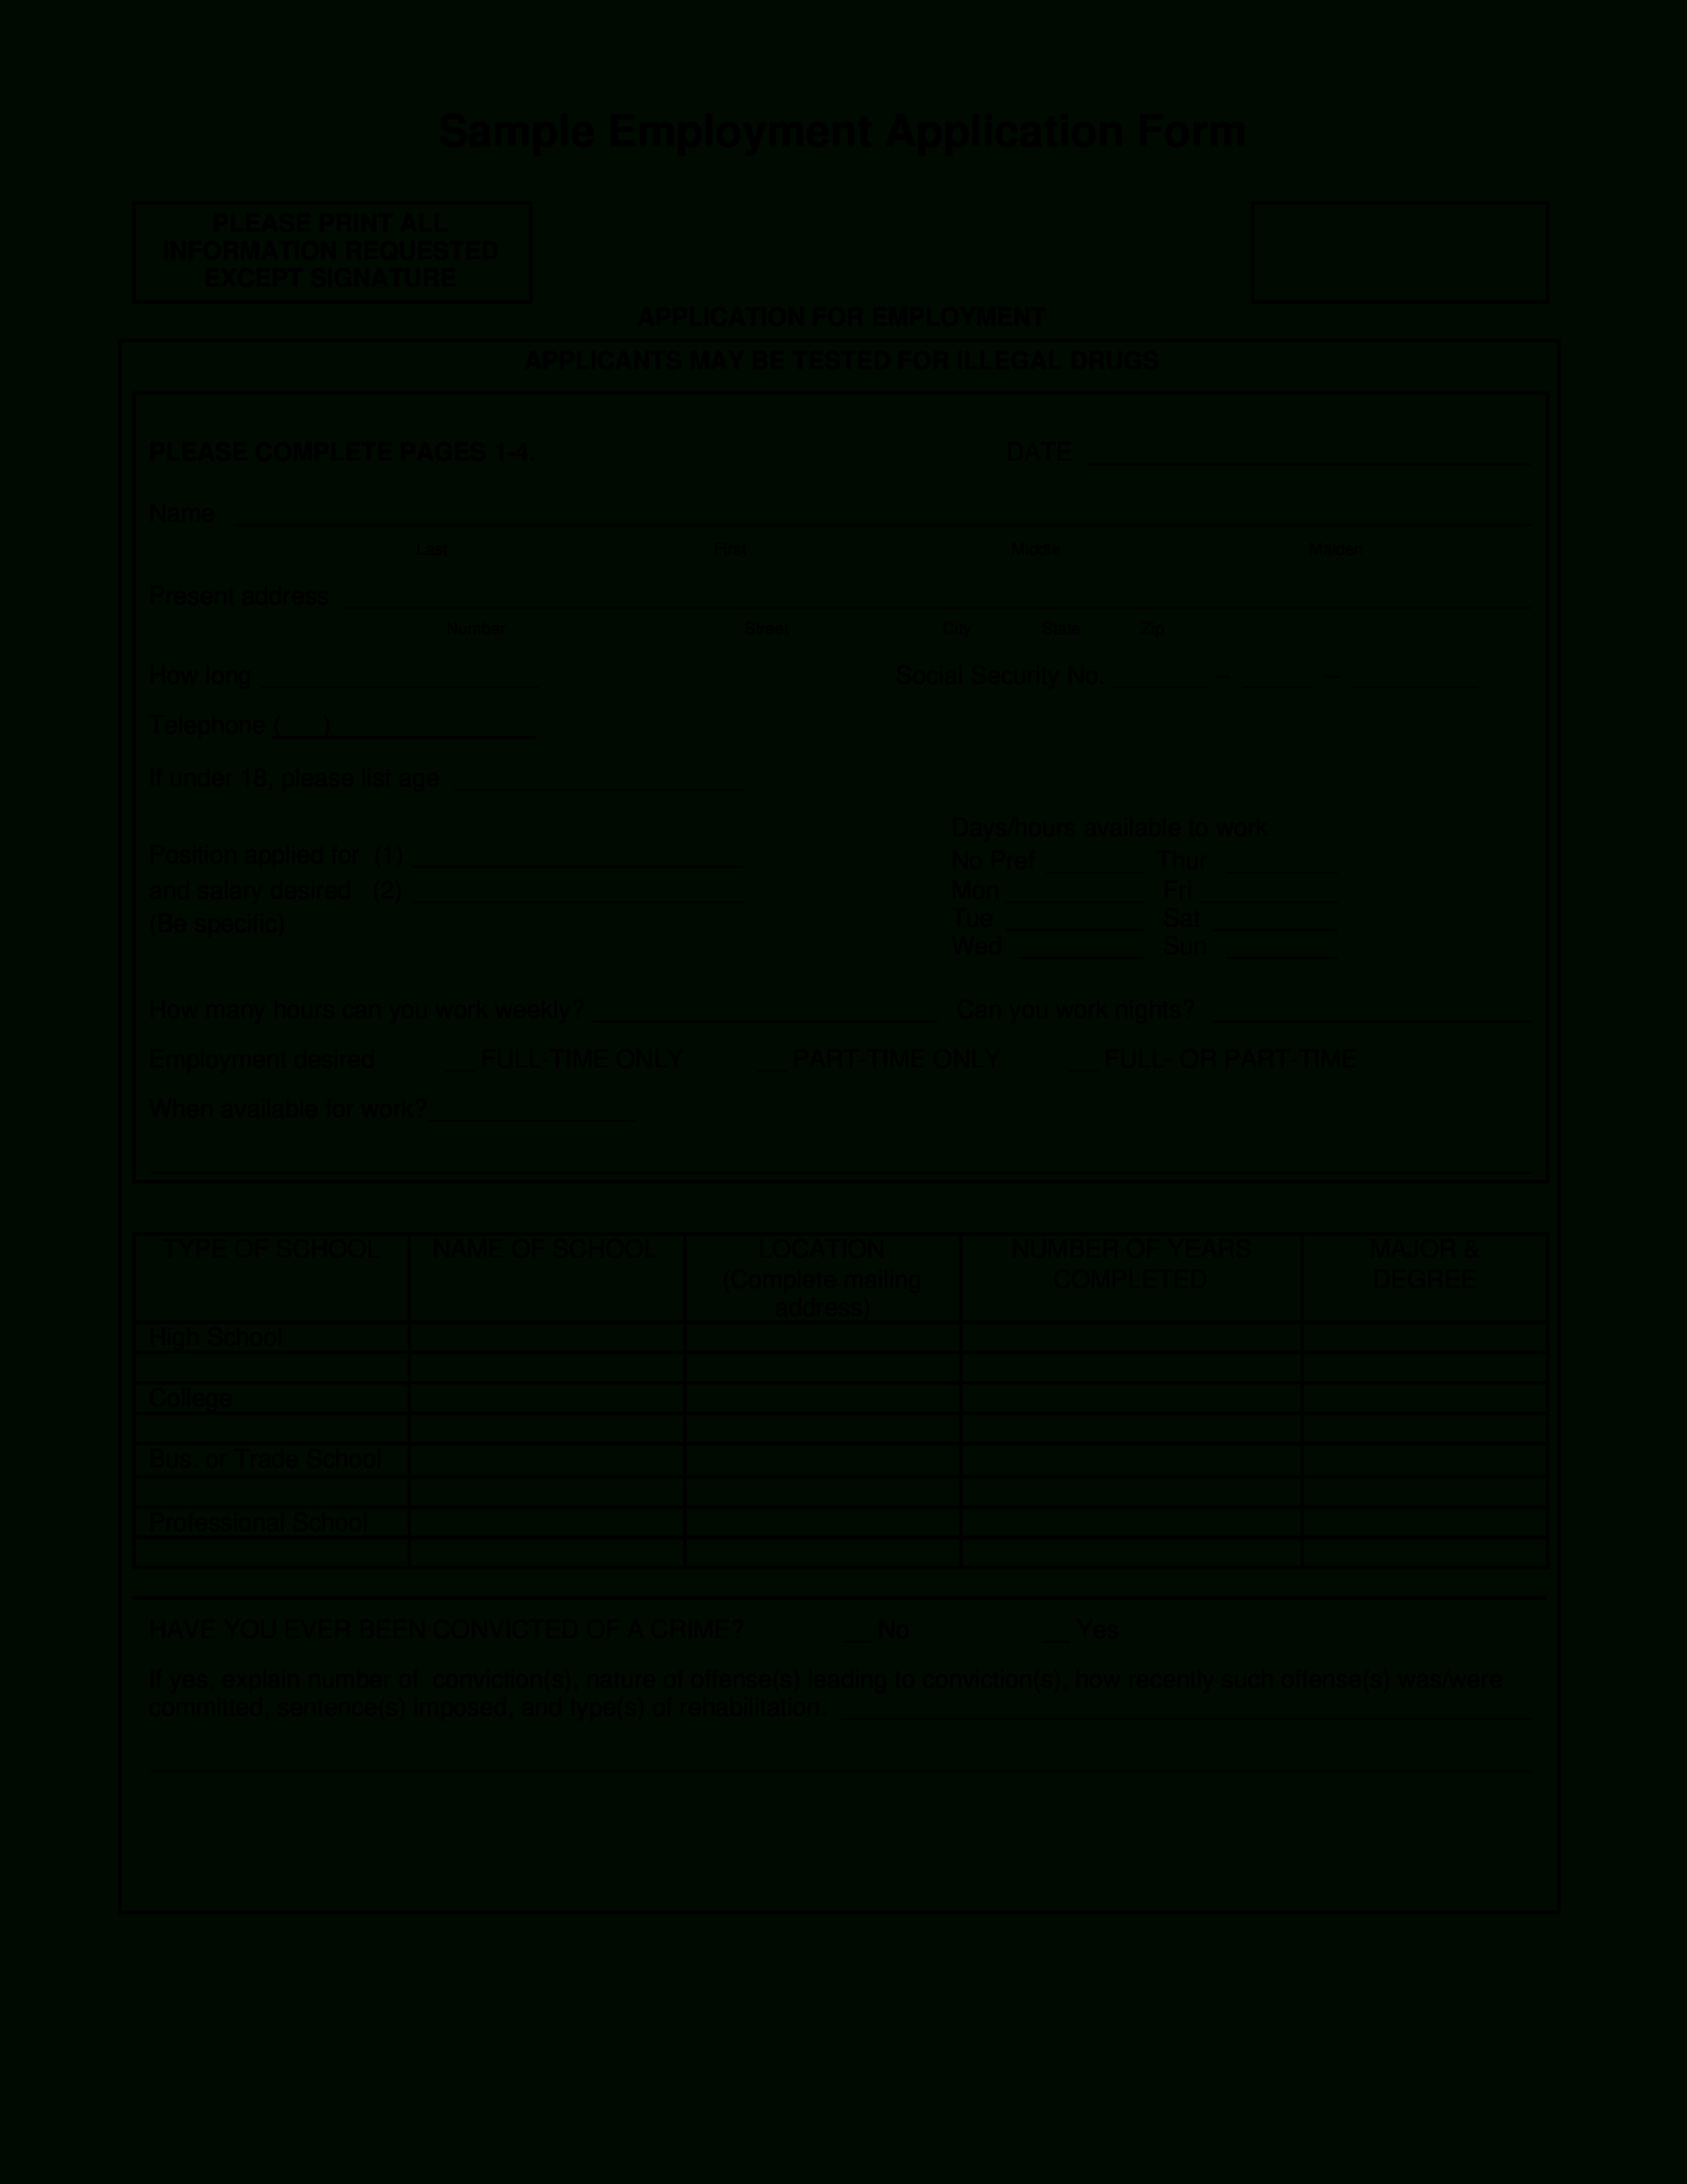 Application For Employment Template Free Letter Pdf Uk Job For Job Application Template Word